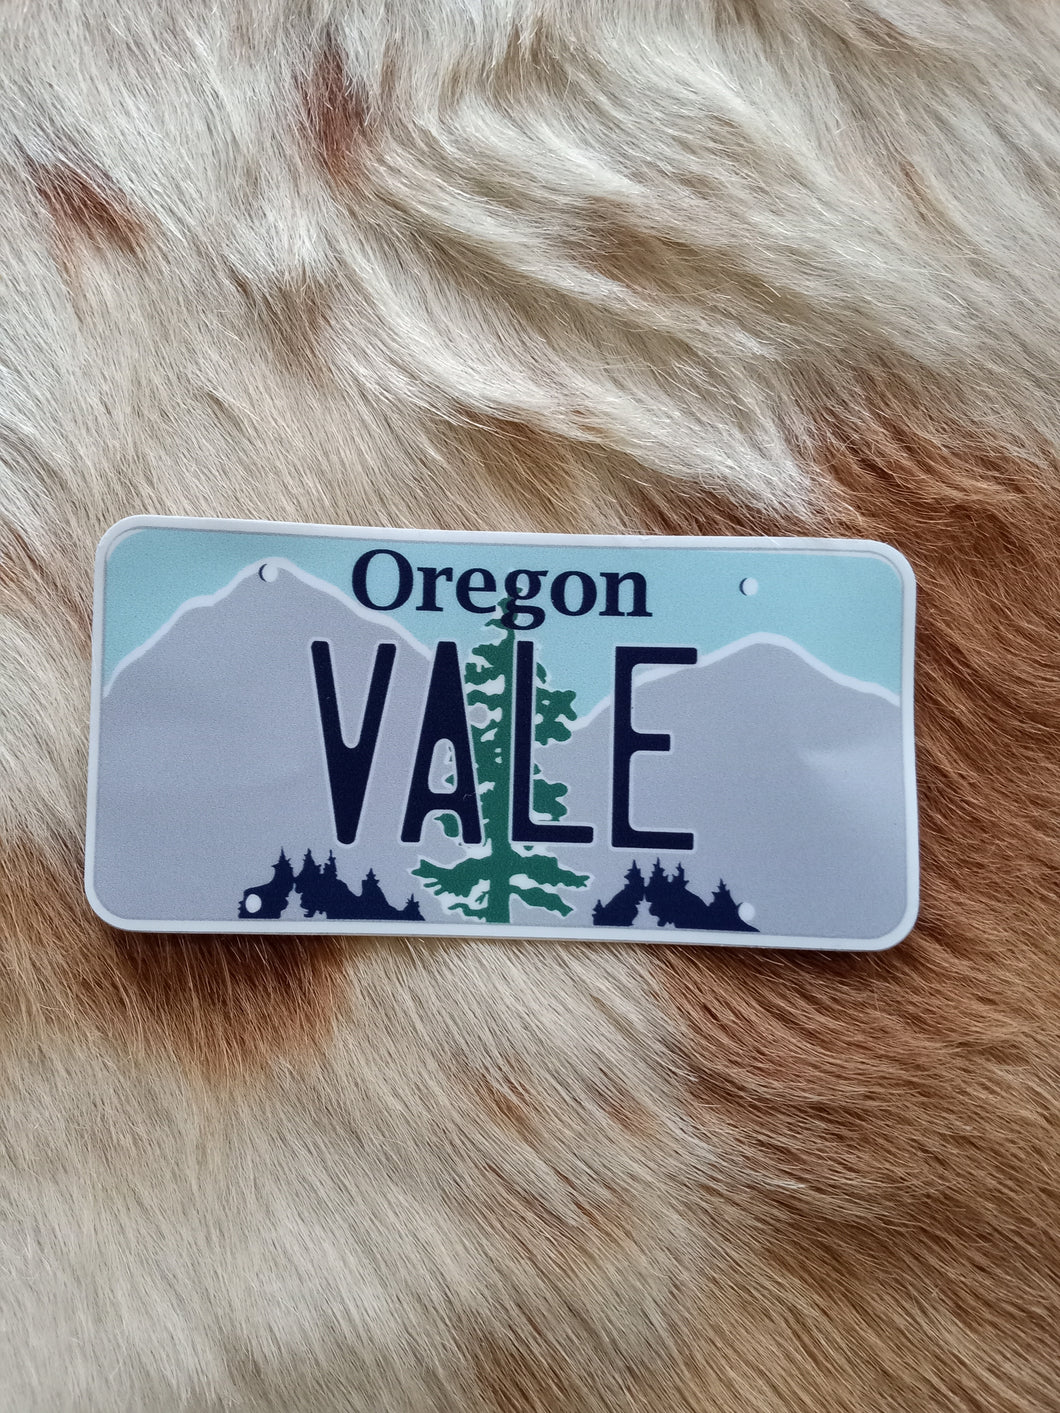 Vale, Oregon Licence Plate Decal Sticker